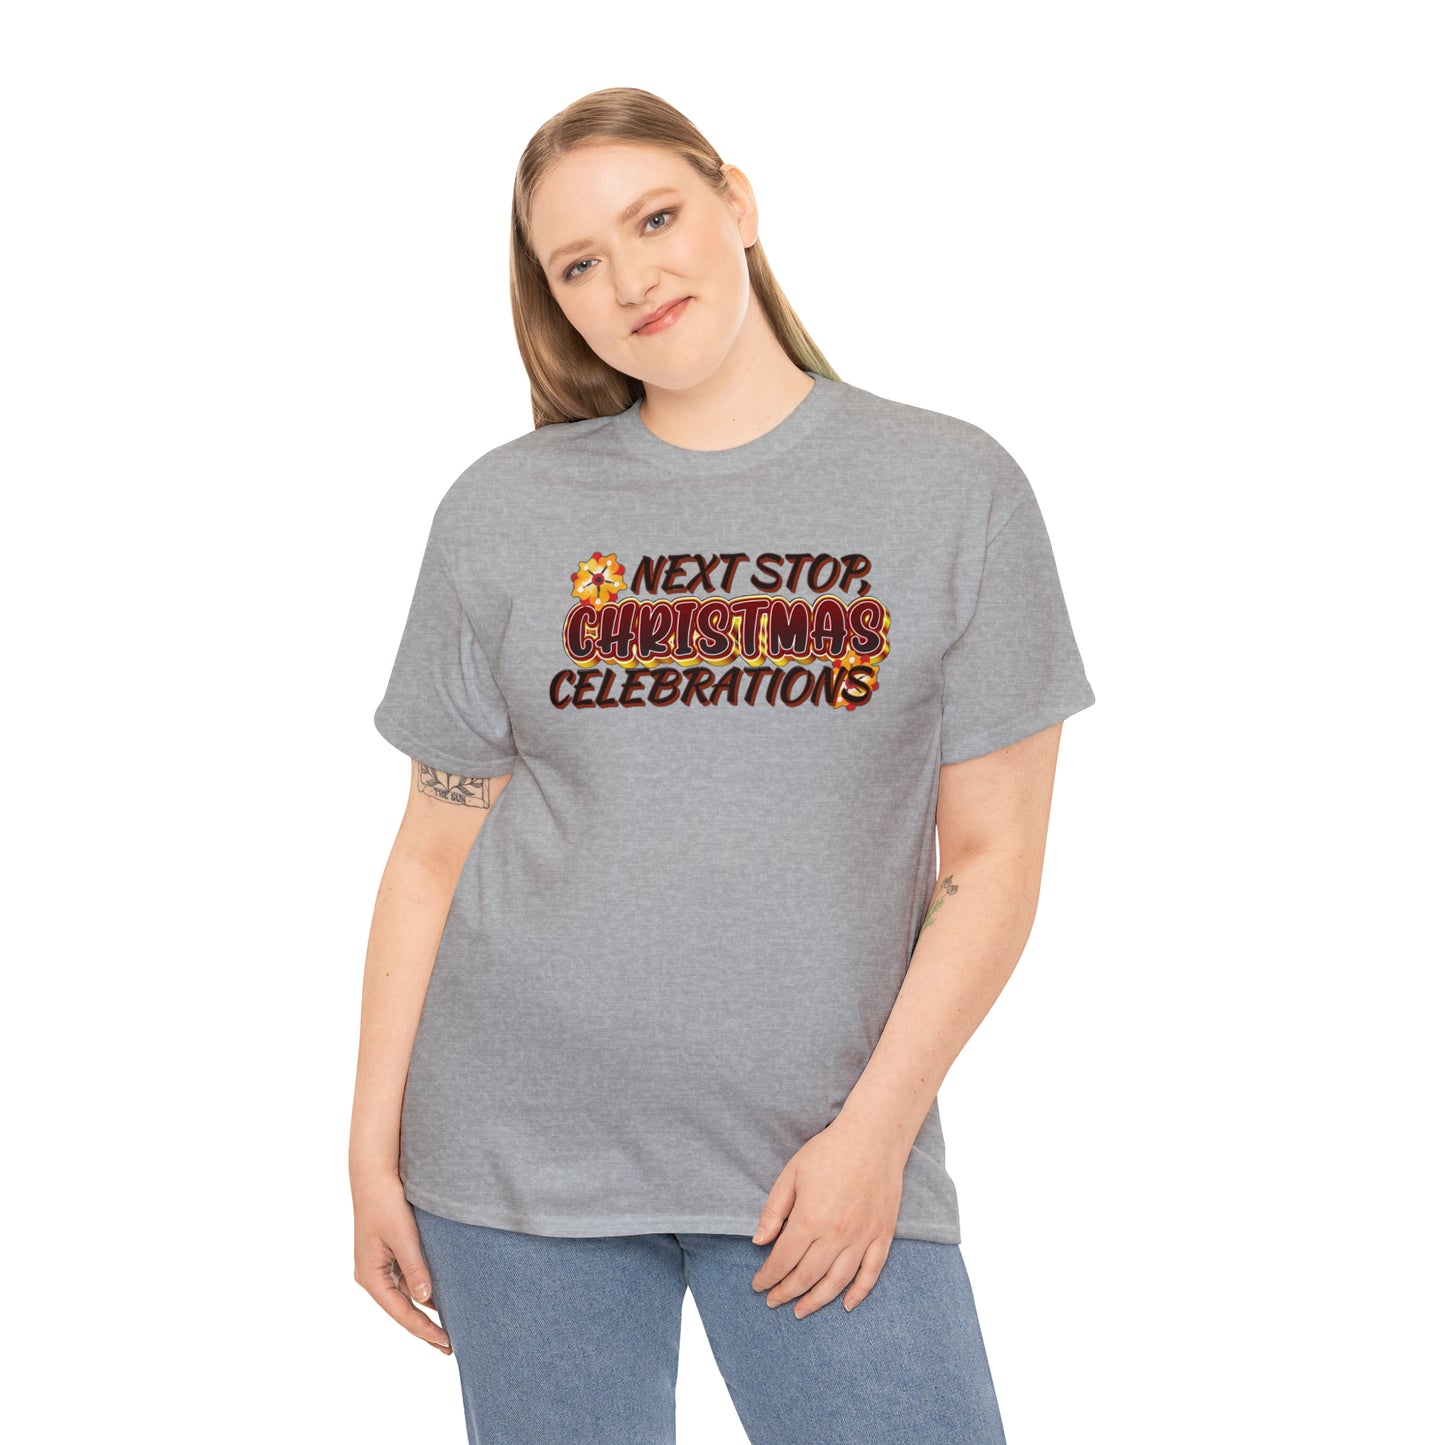 Next Stop Christmas Celebrations - Heavy Cotton Tee for Men and Women